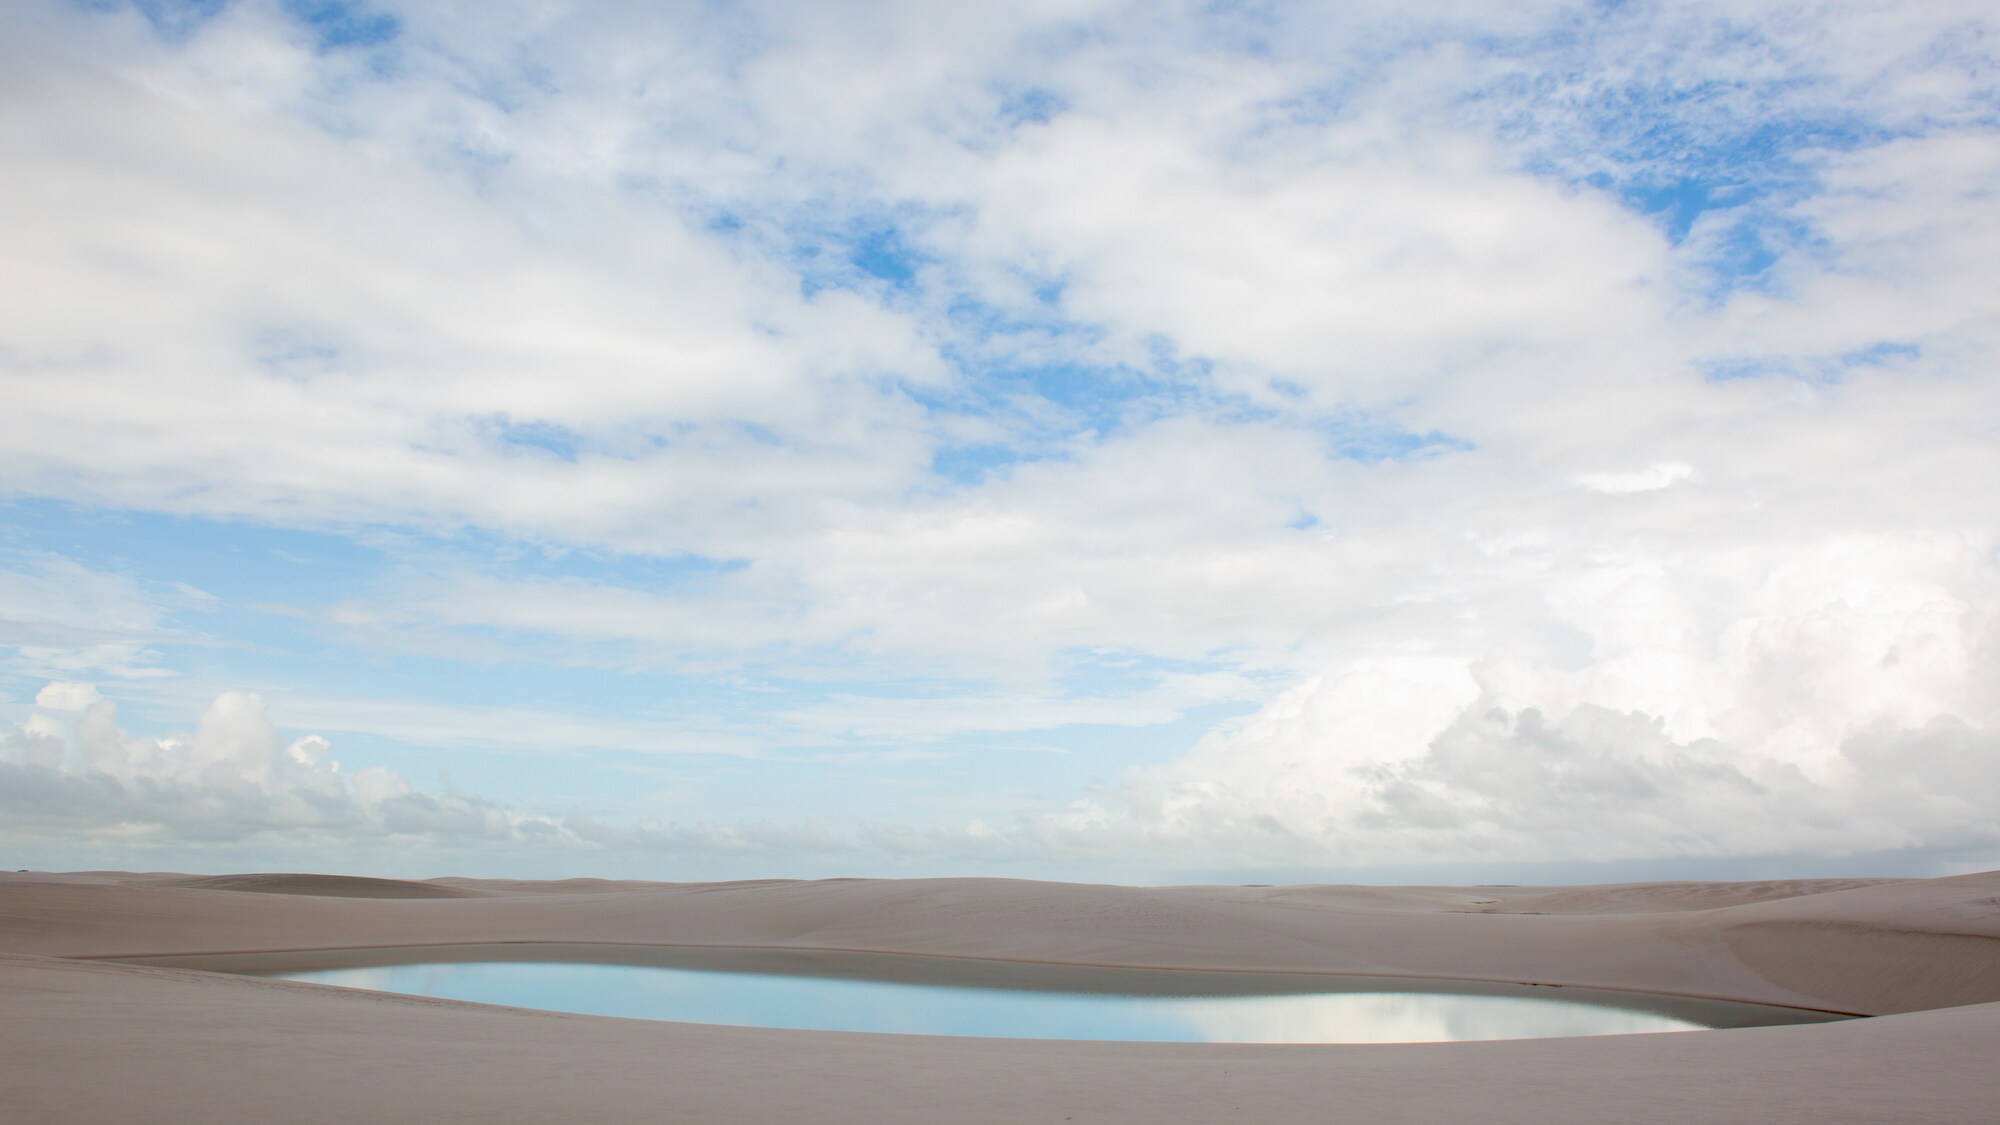 Lagoons in sand dunes. (National Geographic for Disney+/Jody Bourton)